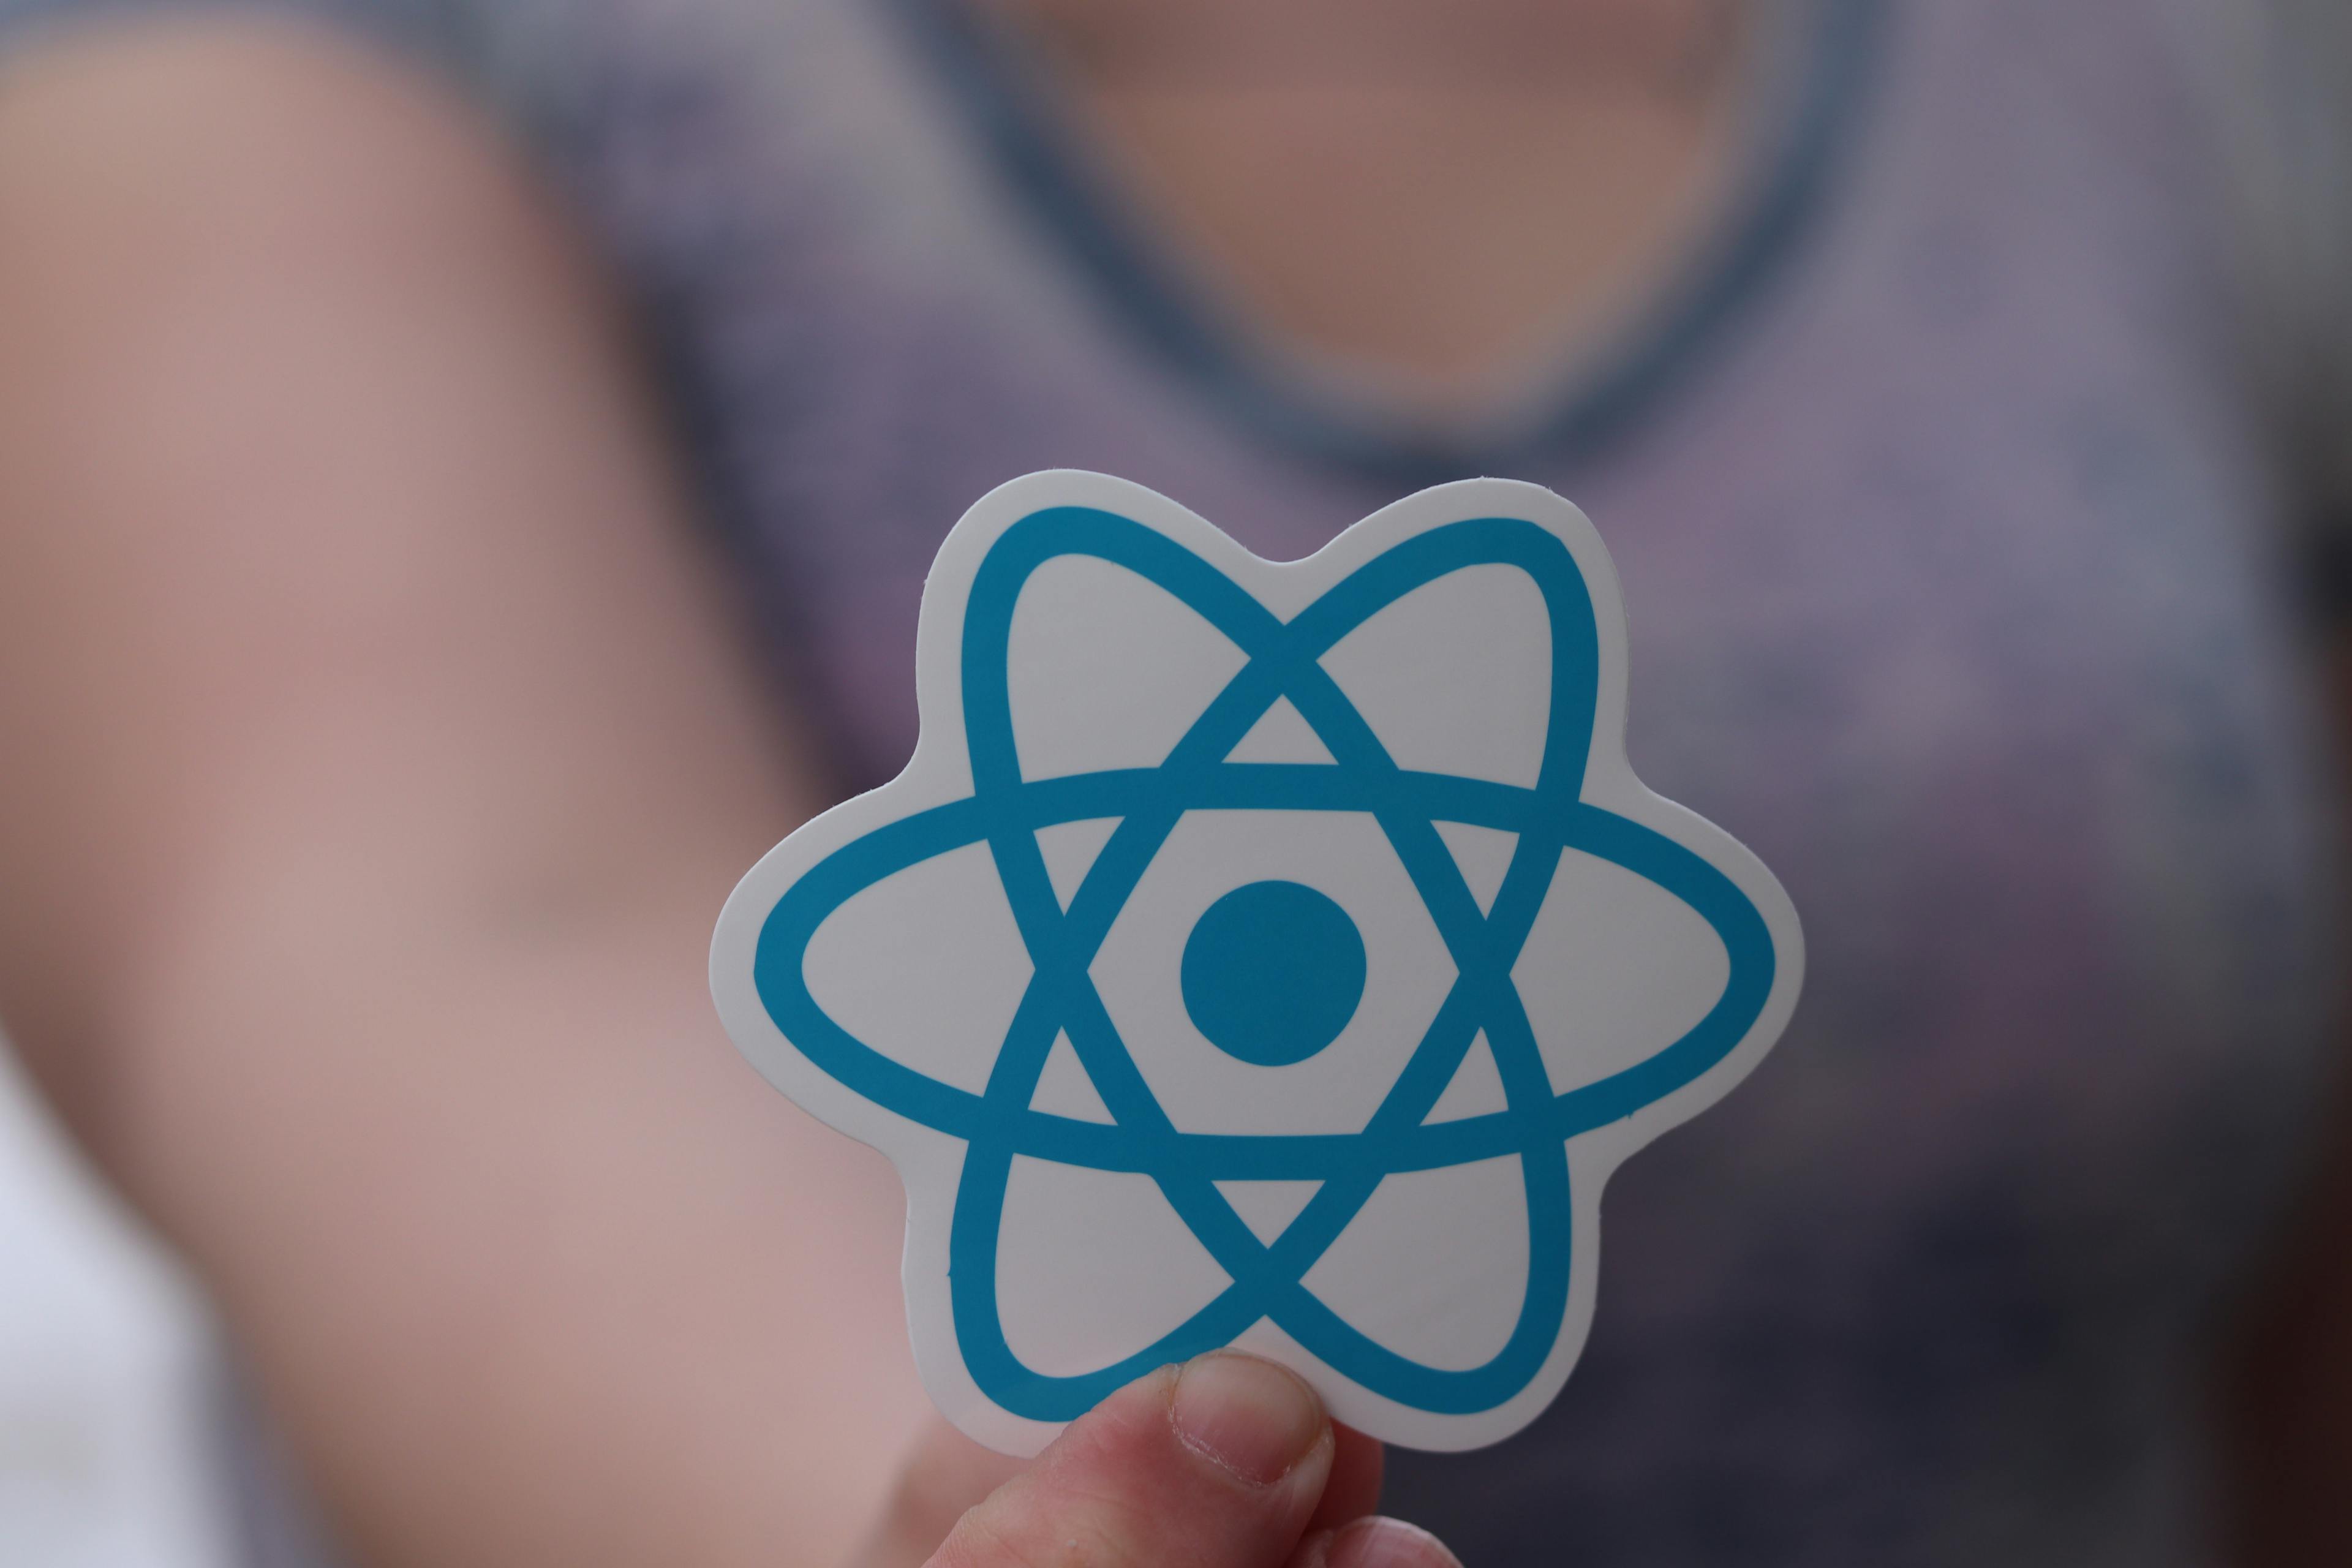 React, the powerful JS library from Facebook 🚀